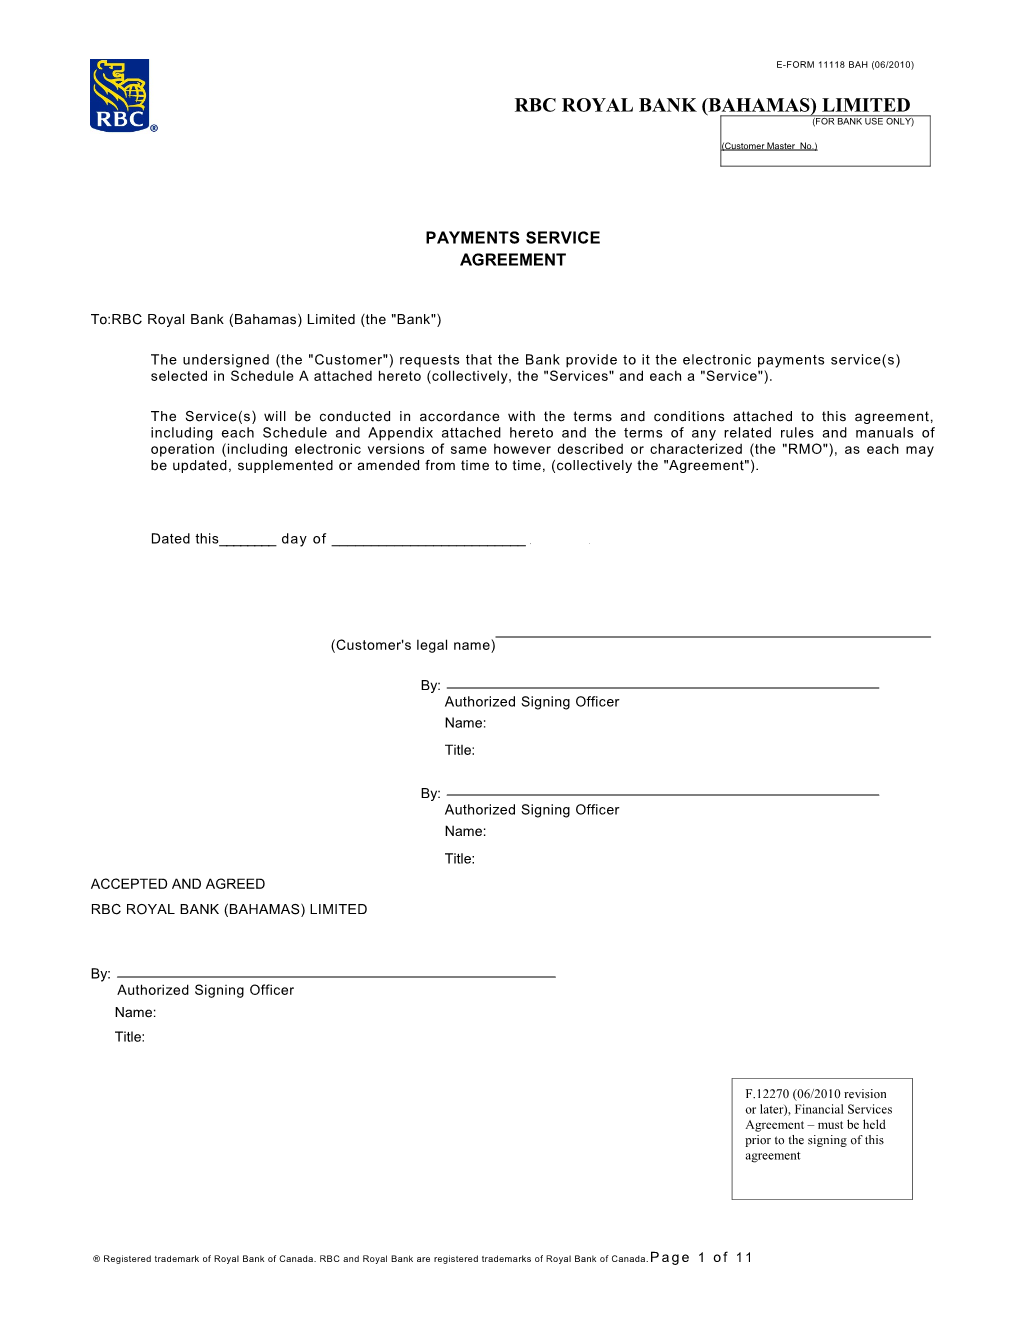 Business Clients - Payments Service Agreement